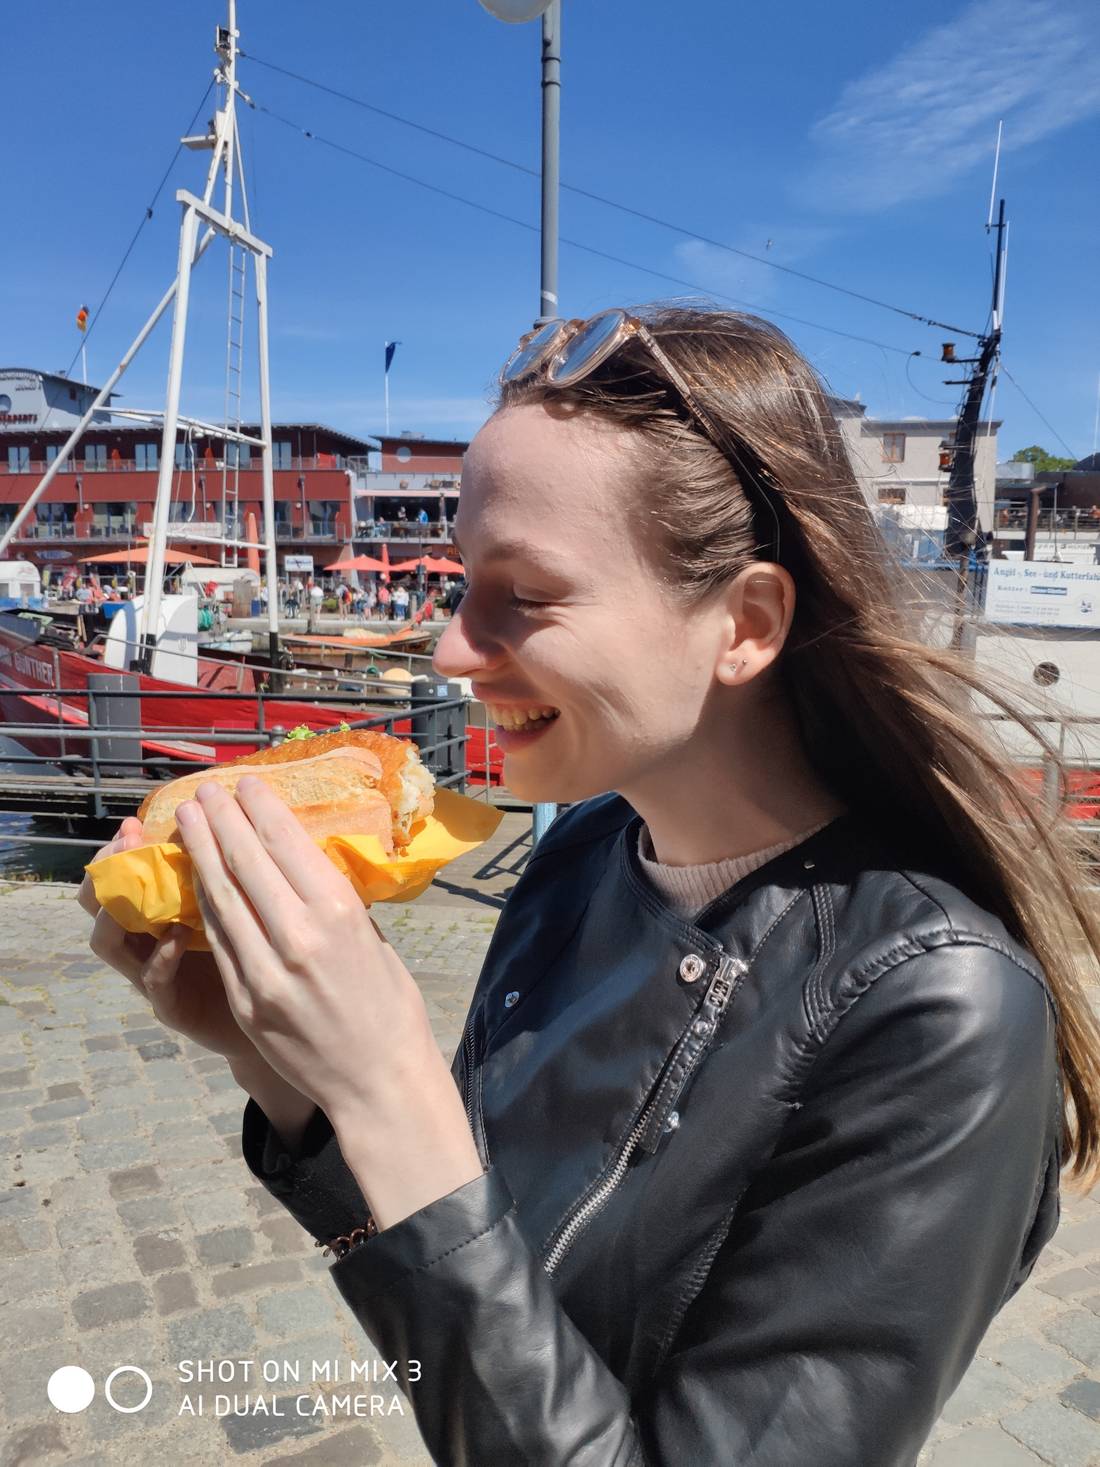 I’m happy with my fish sandwich in my hand